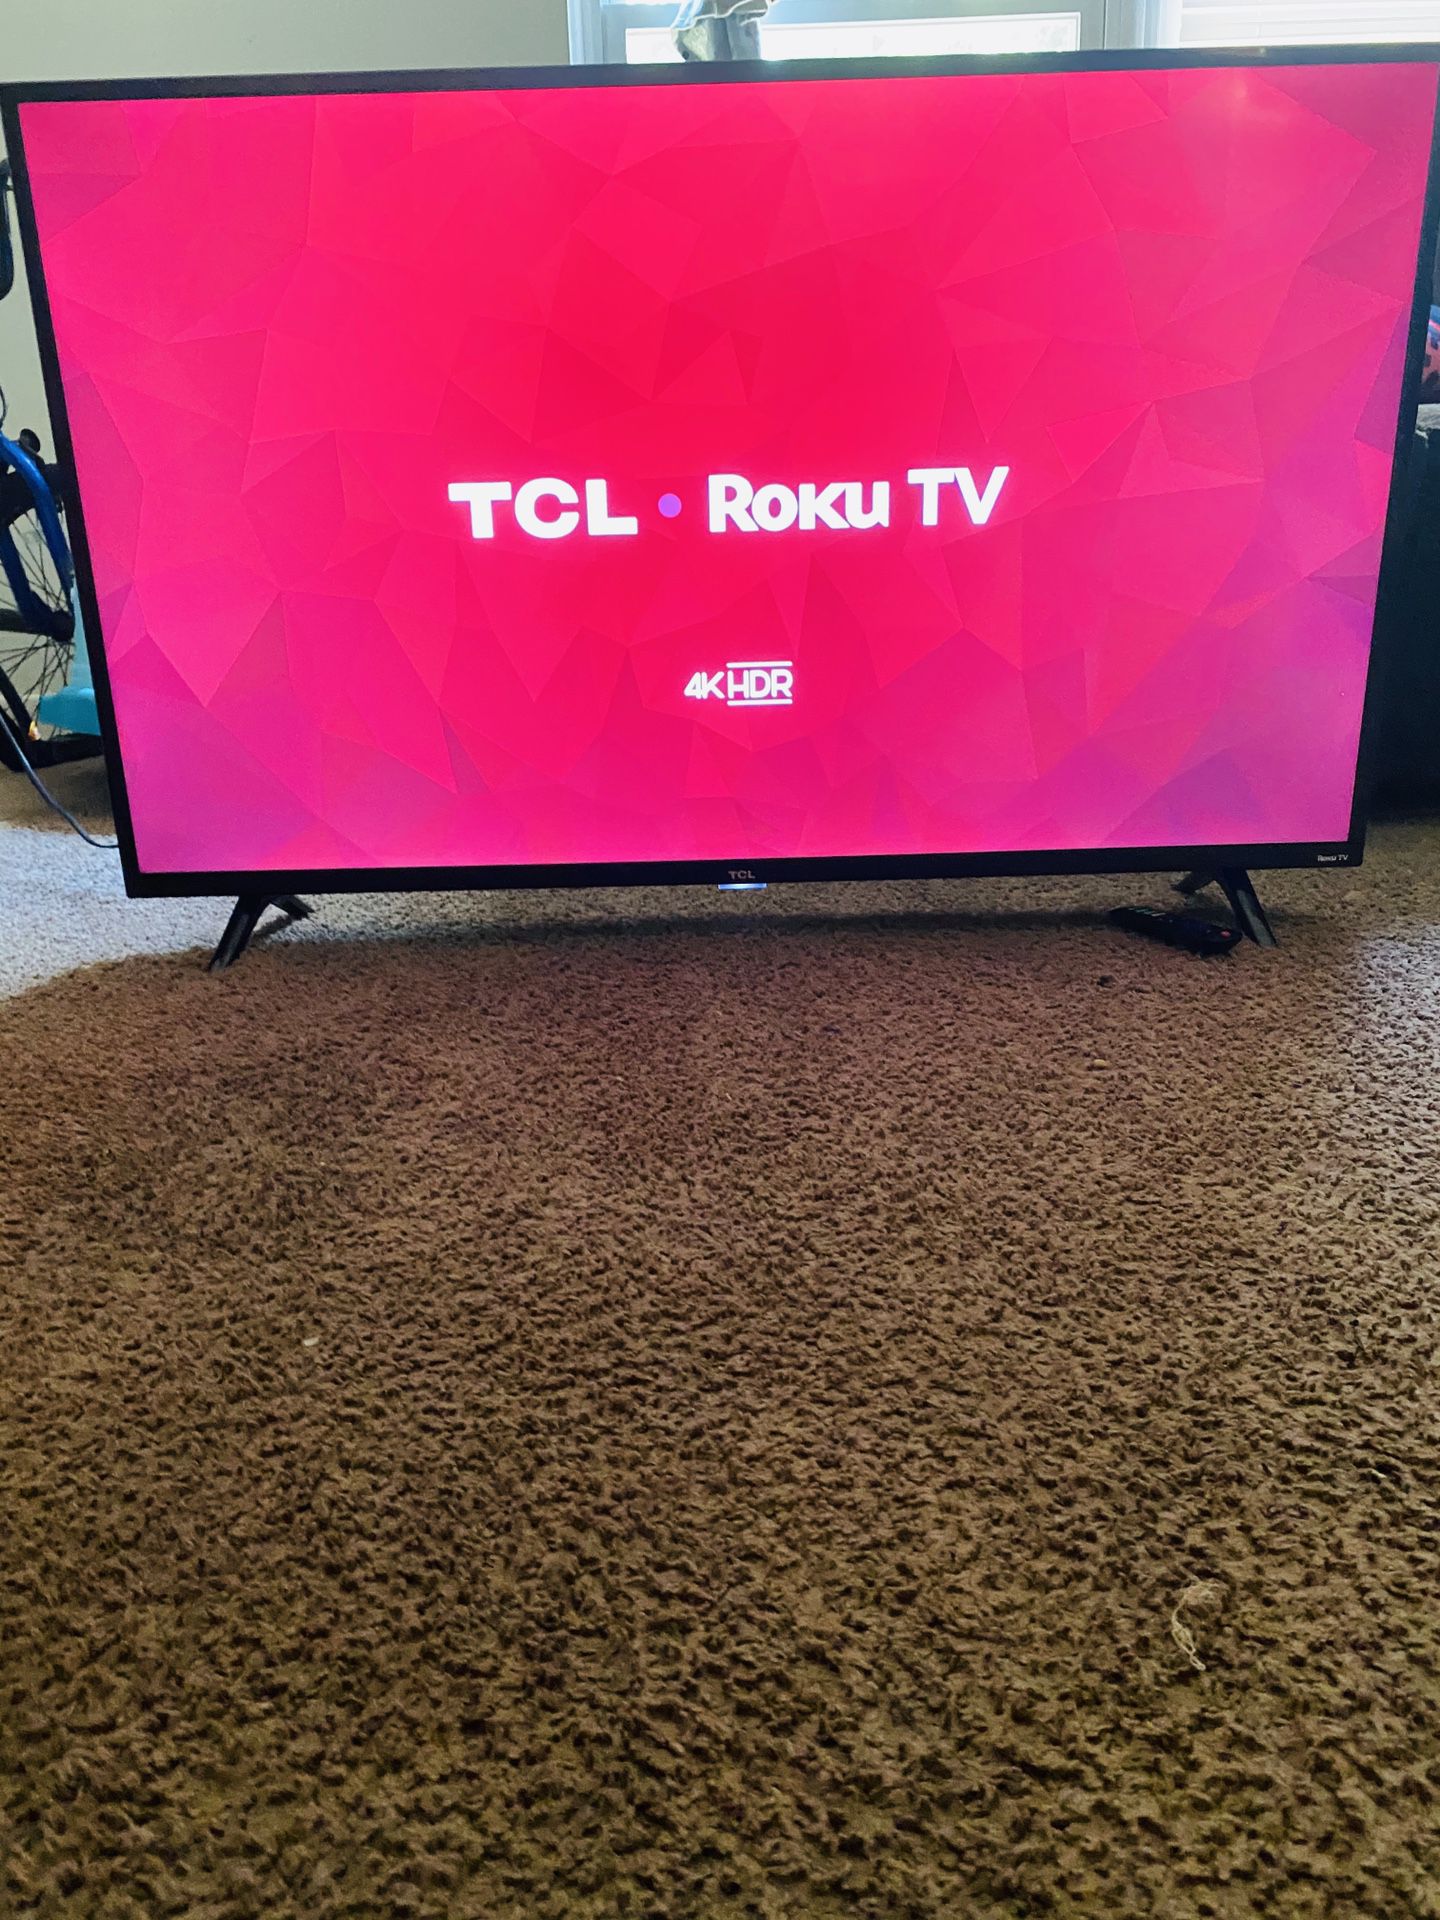 50” TCL Roku Tv with remote, Black, HDMI,4K definition, Model 50S421